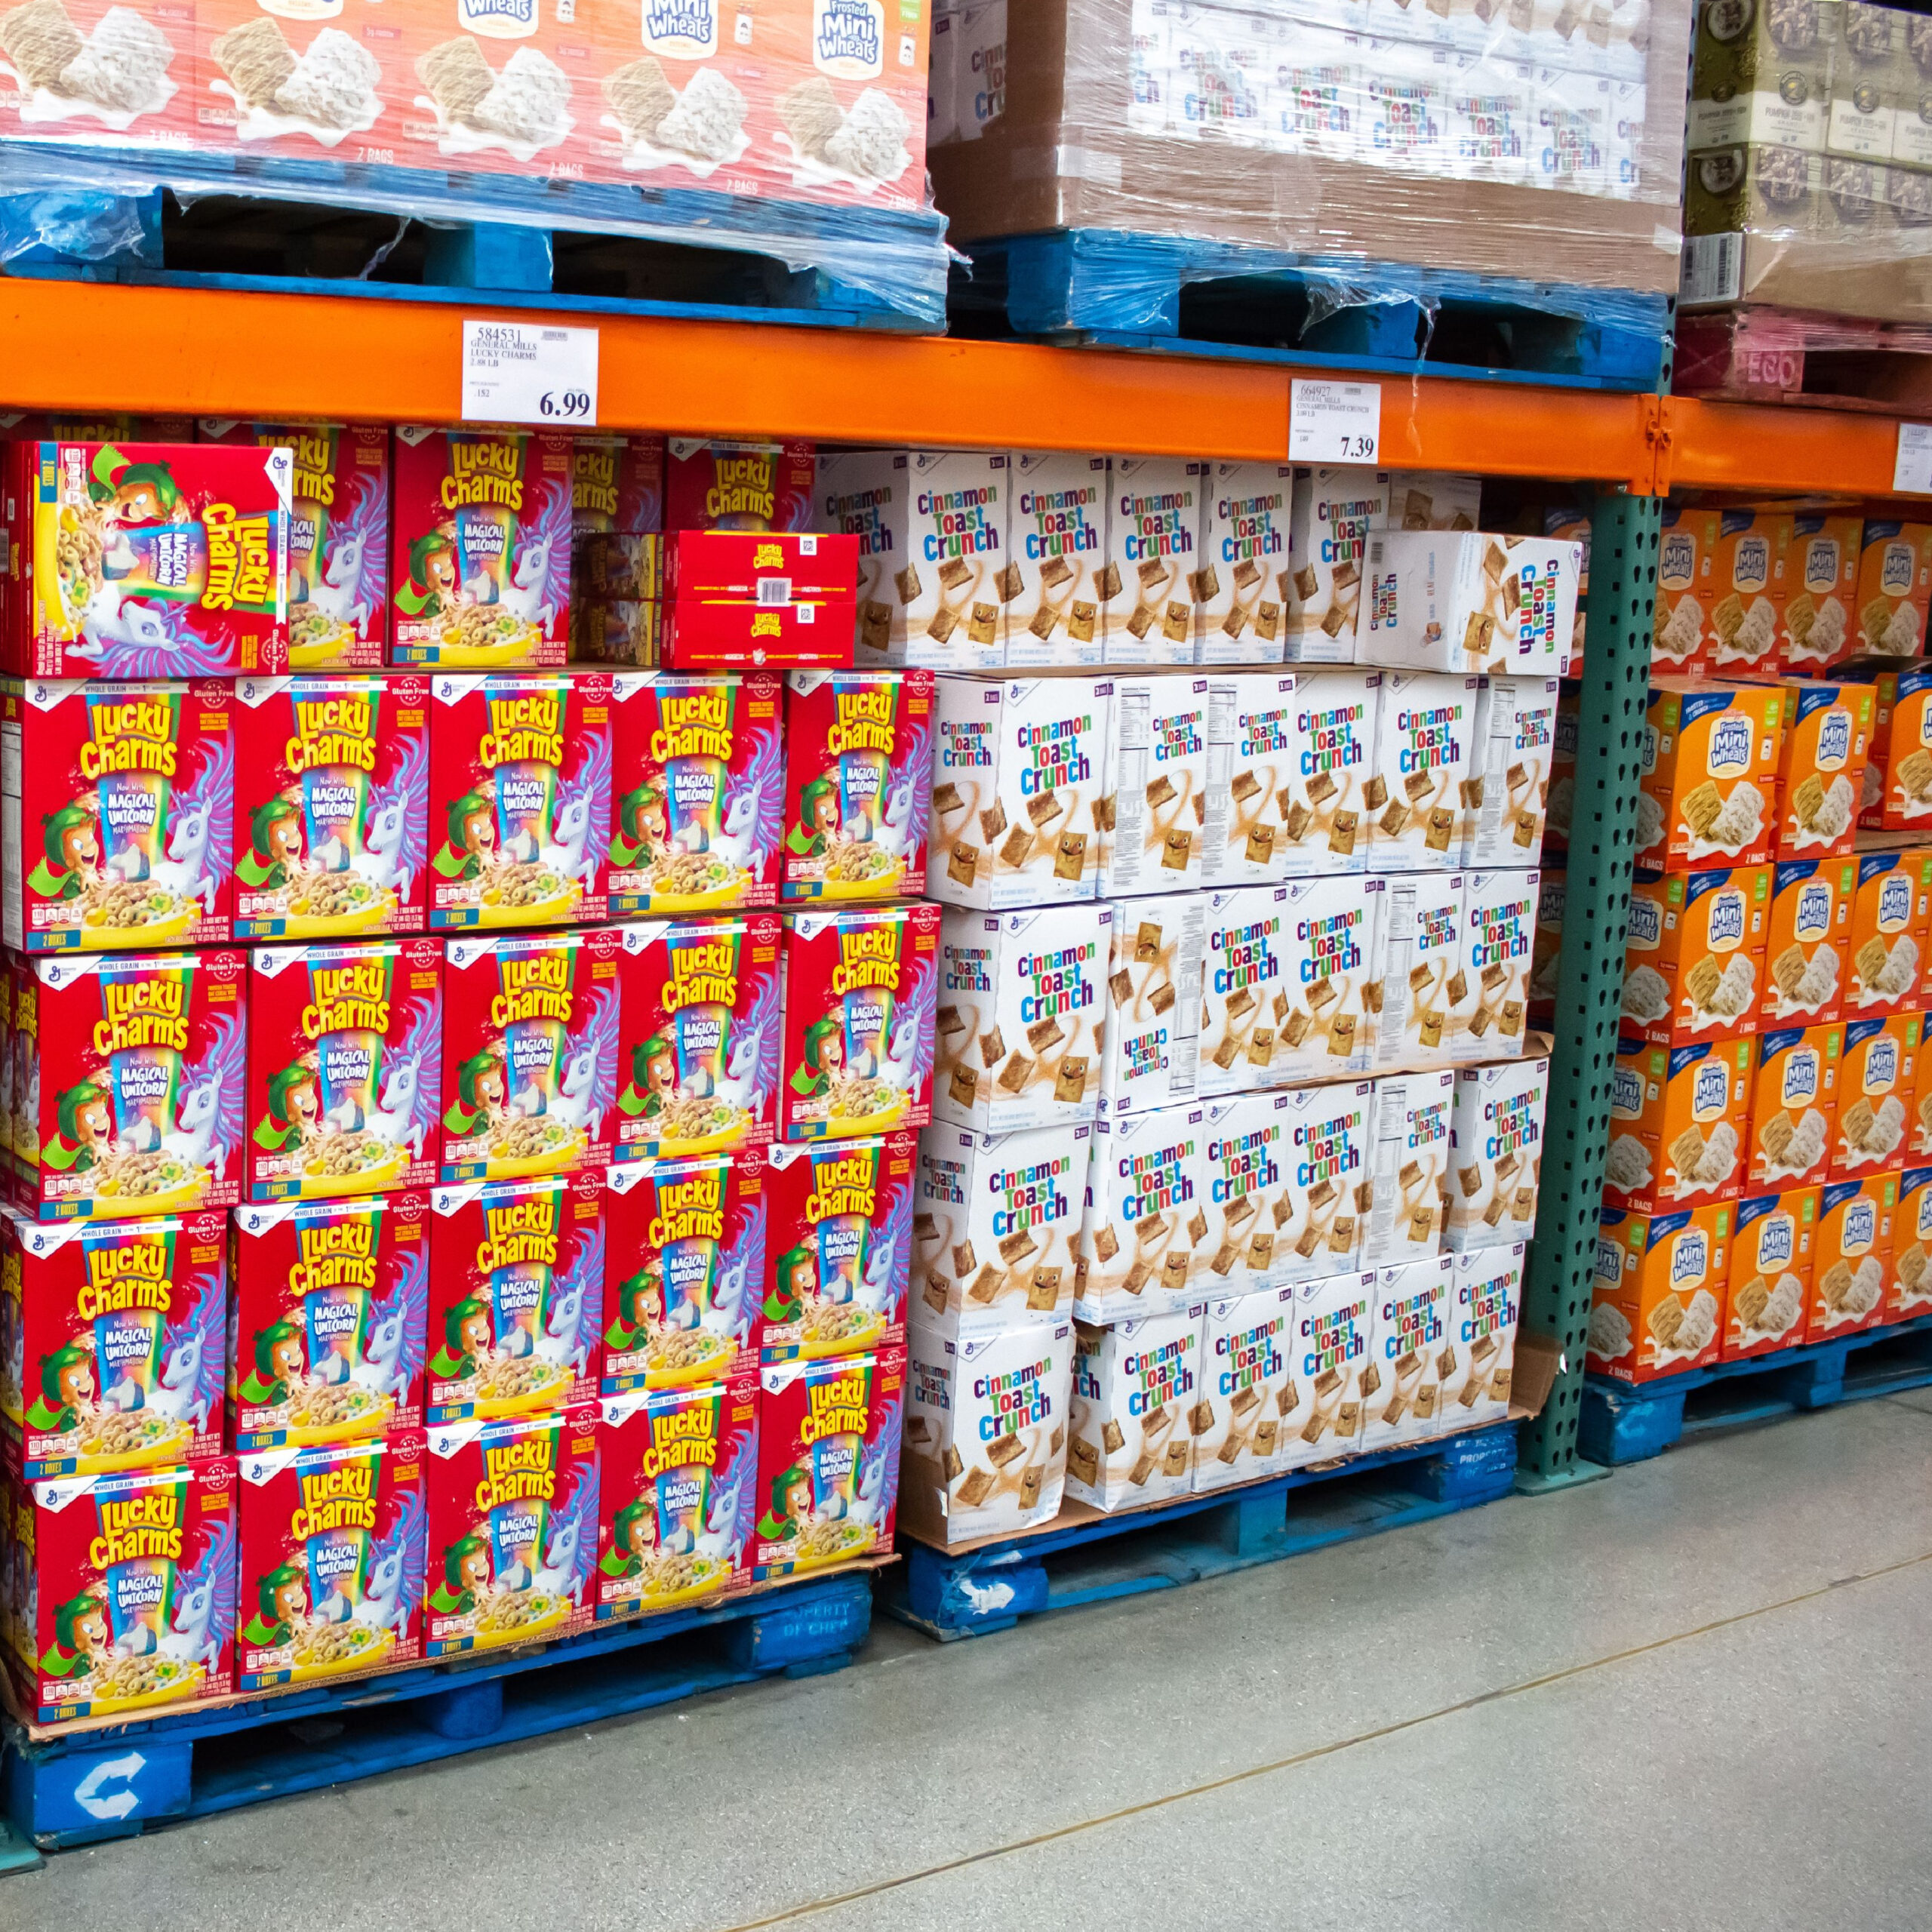 The Reason You Shouldn't Buy Cereal at Costco